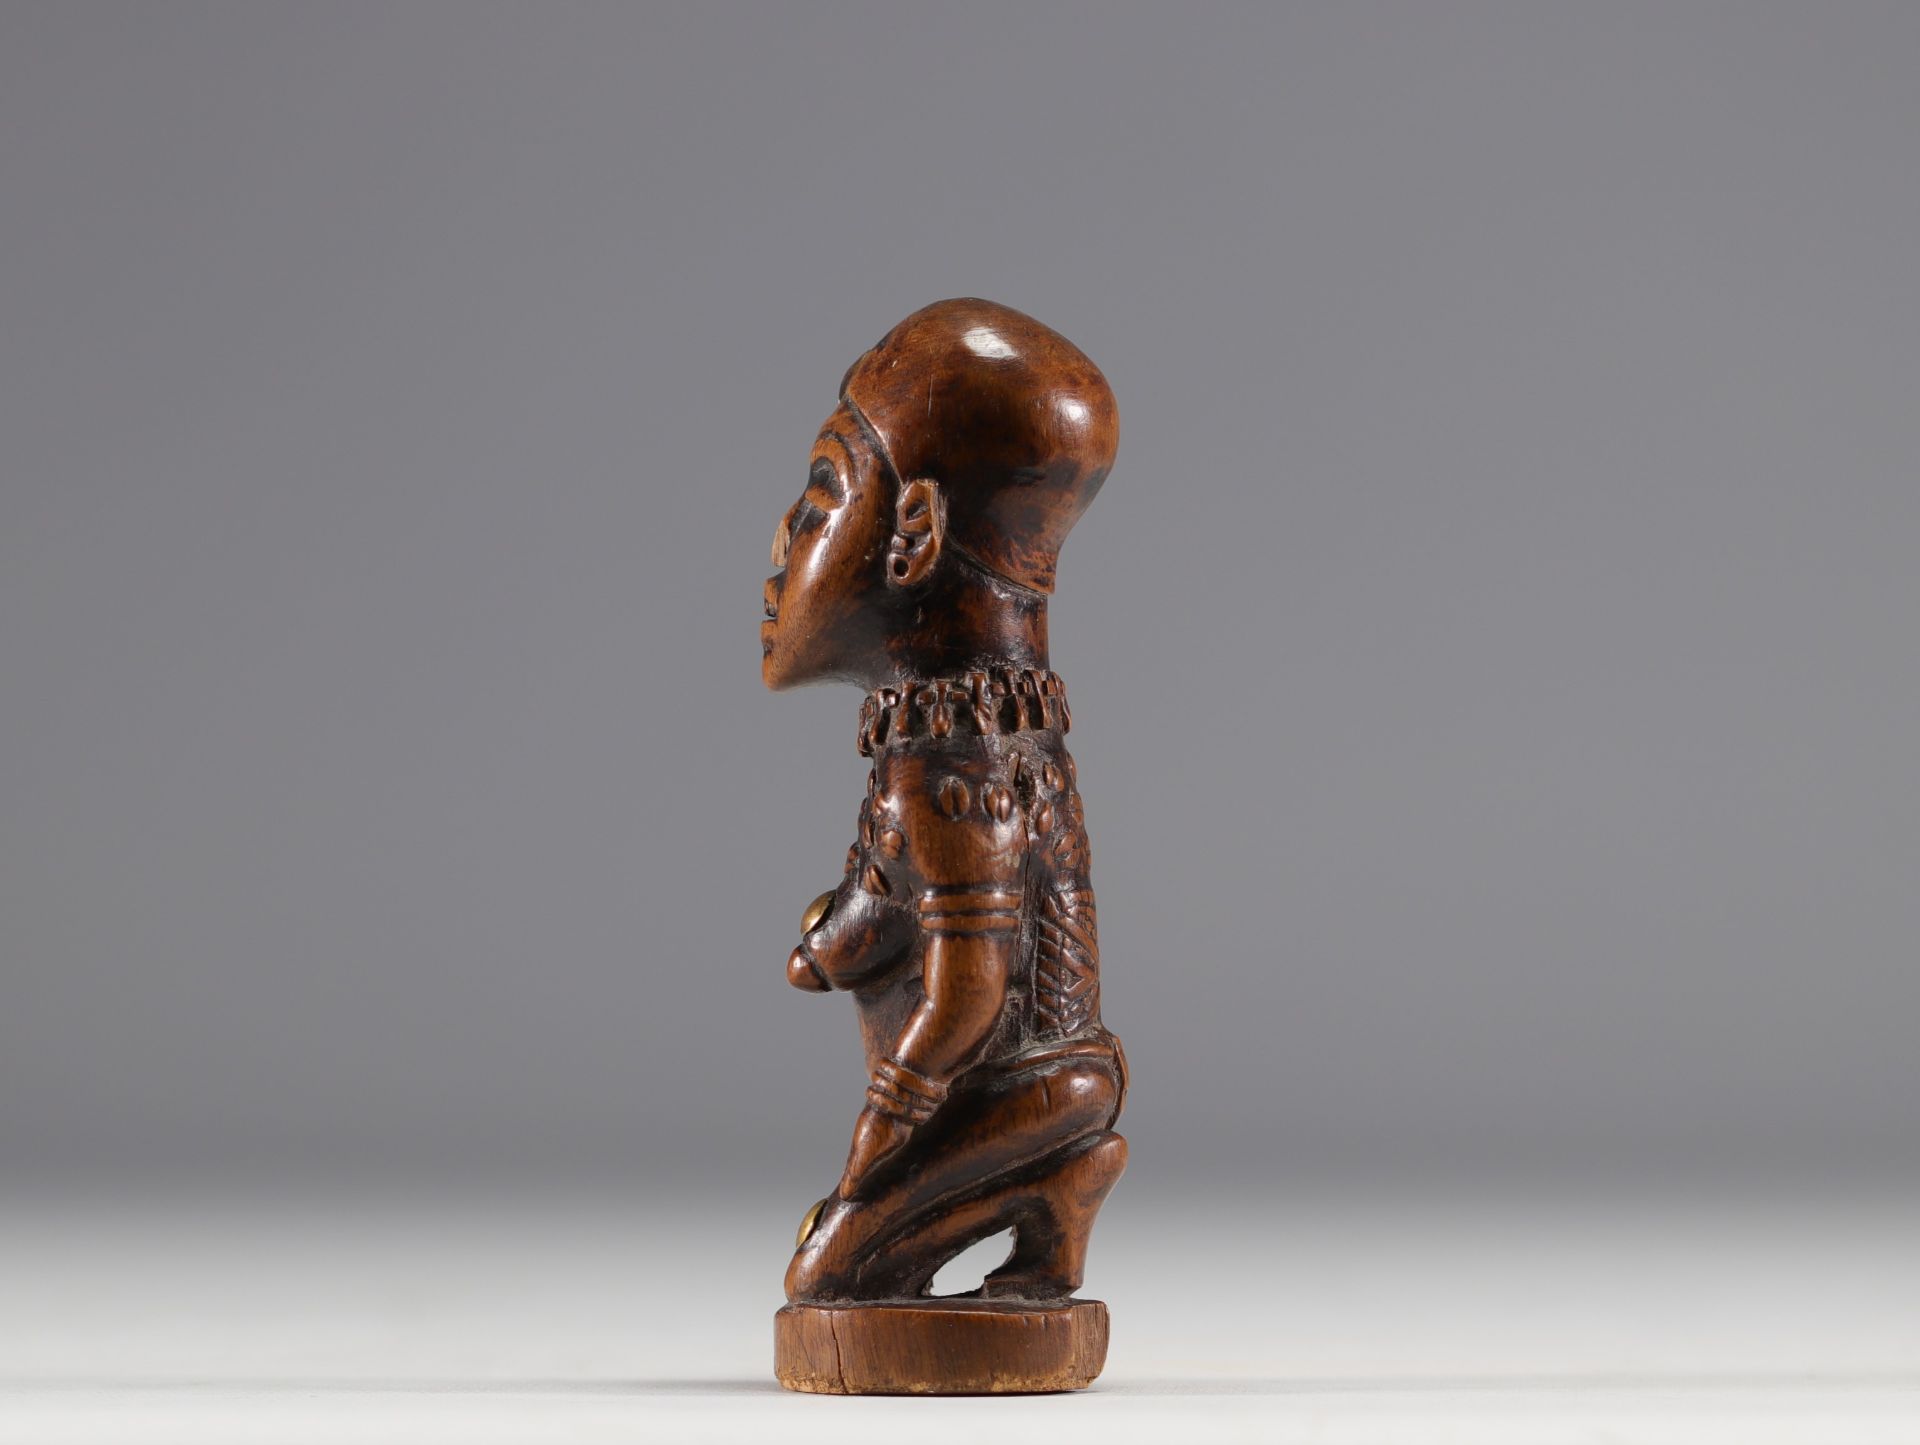 Rare Bas-Congo statuette in carved wood with scarification marks and nails from the 1900s - Image 5 of 6